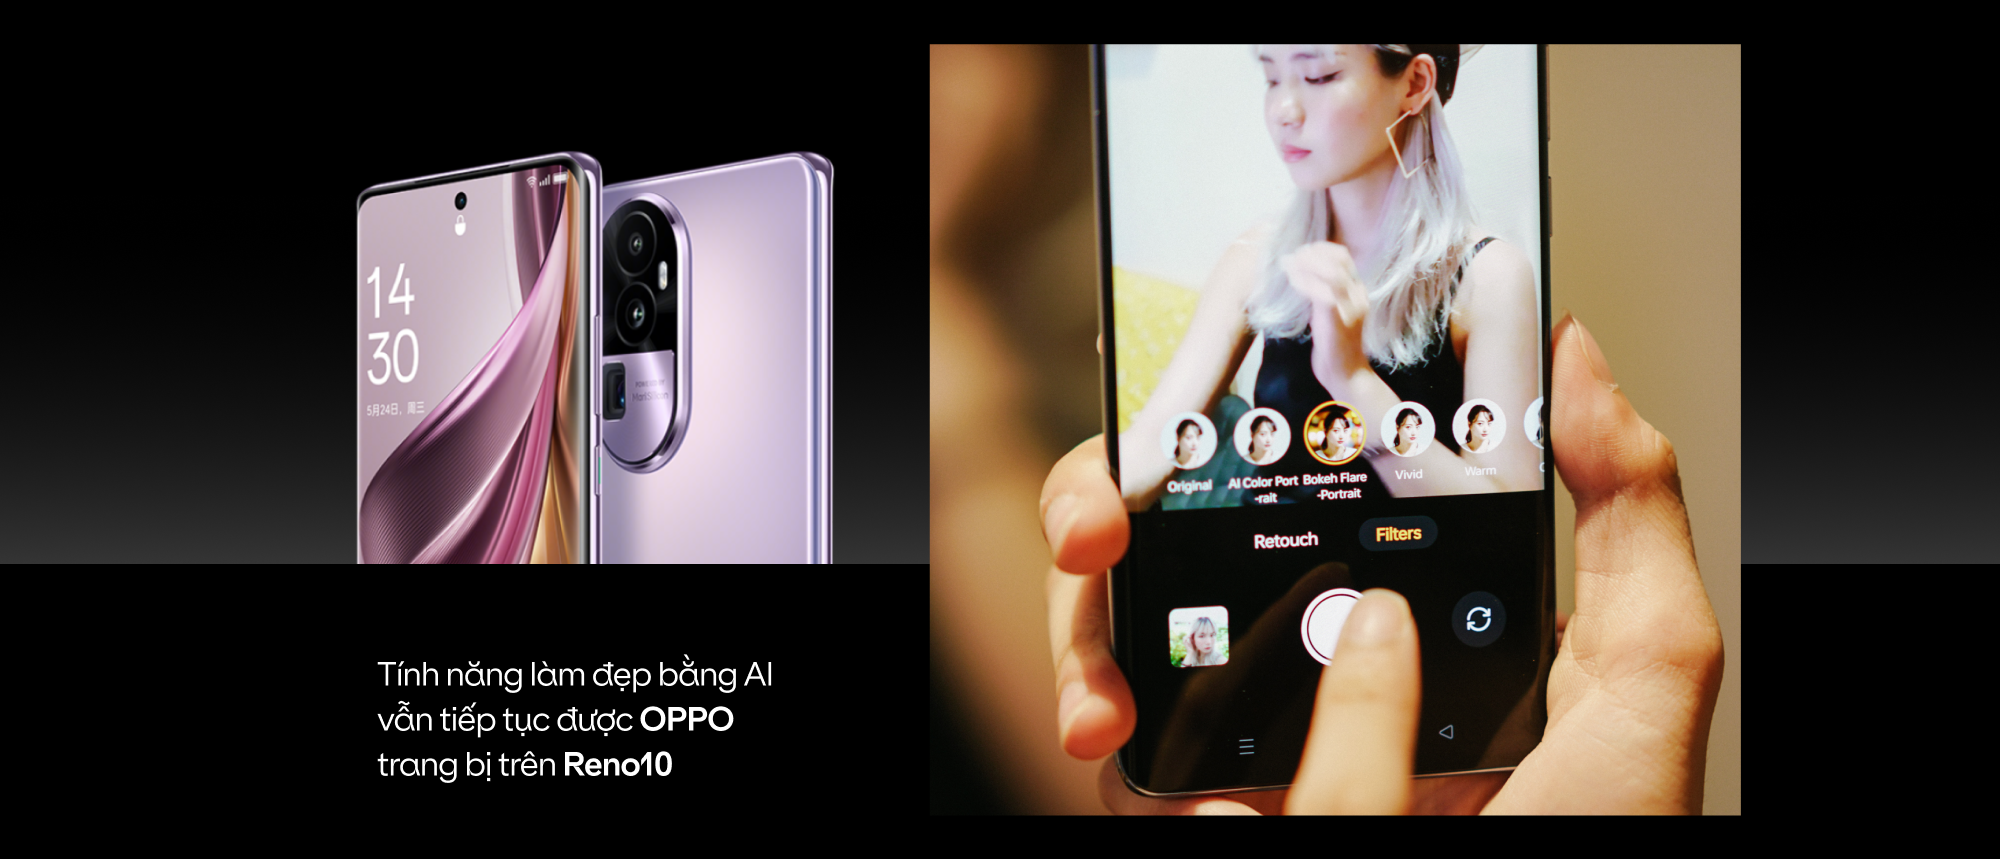 4 years and 10 years of OPPO Reno: looking at the ultra-fast development of smartphones with young people - photo 23.